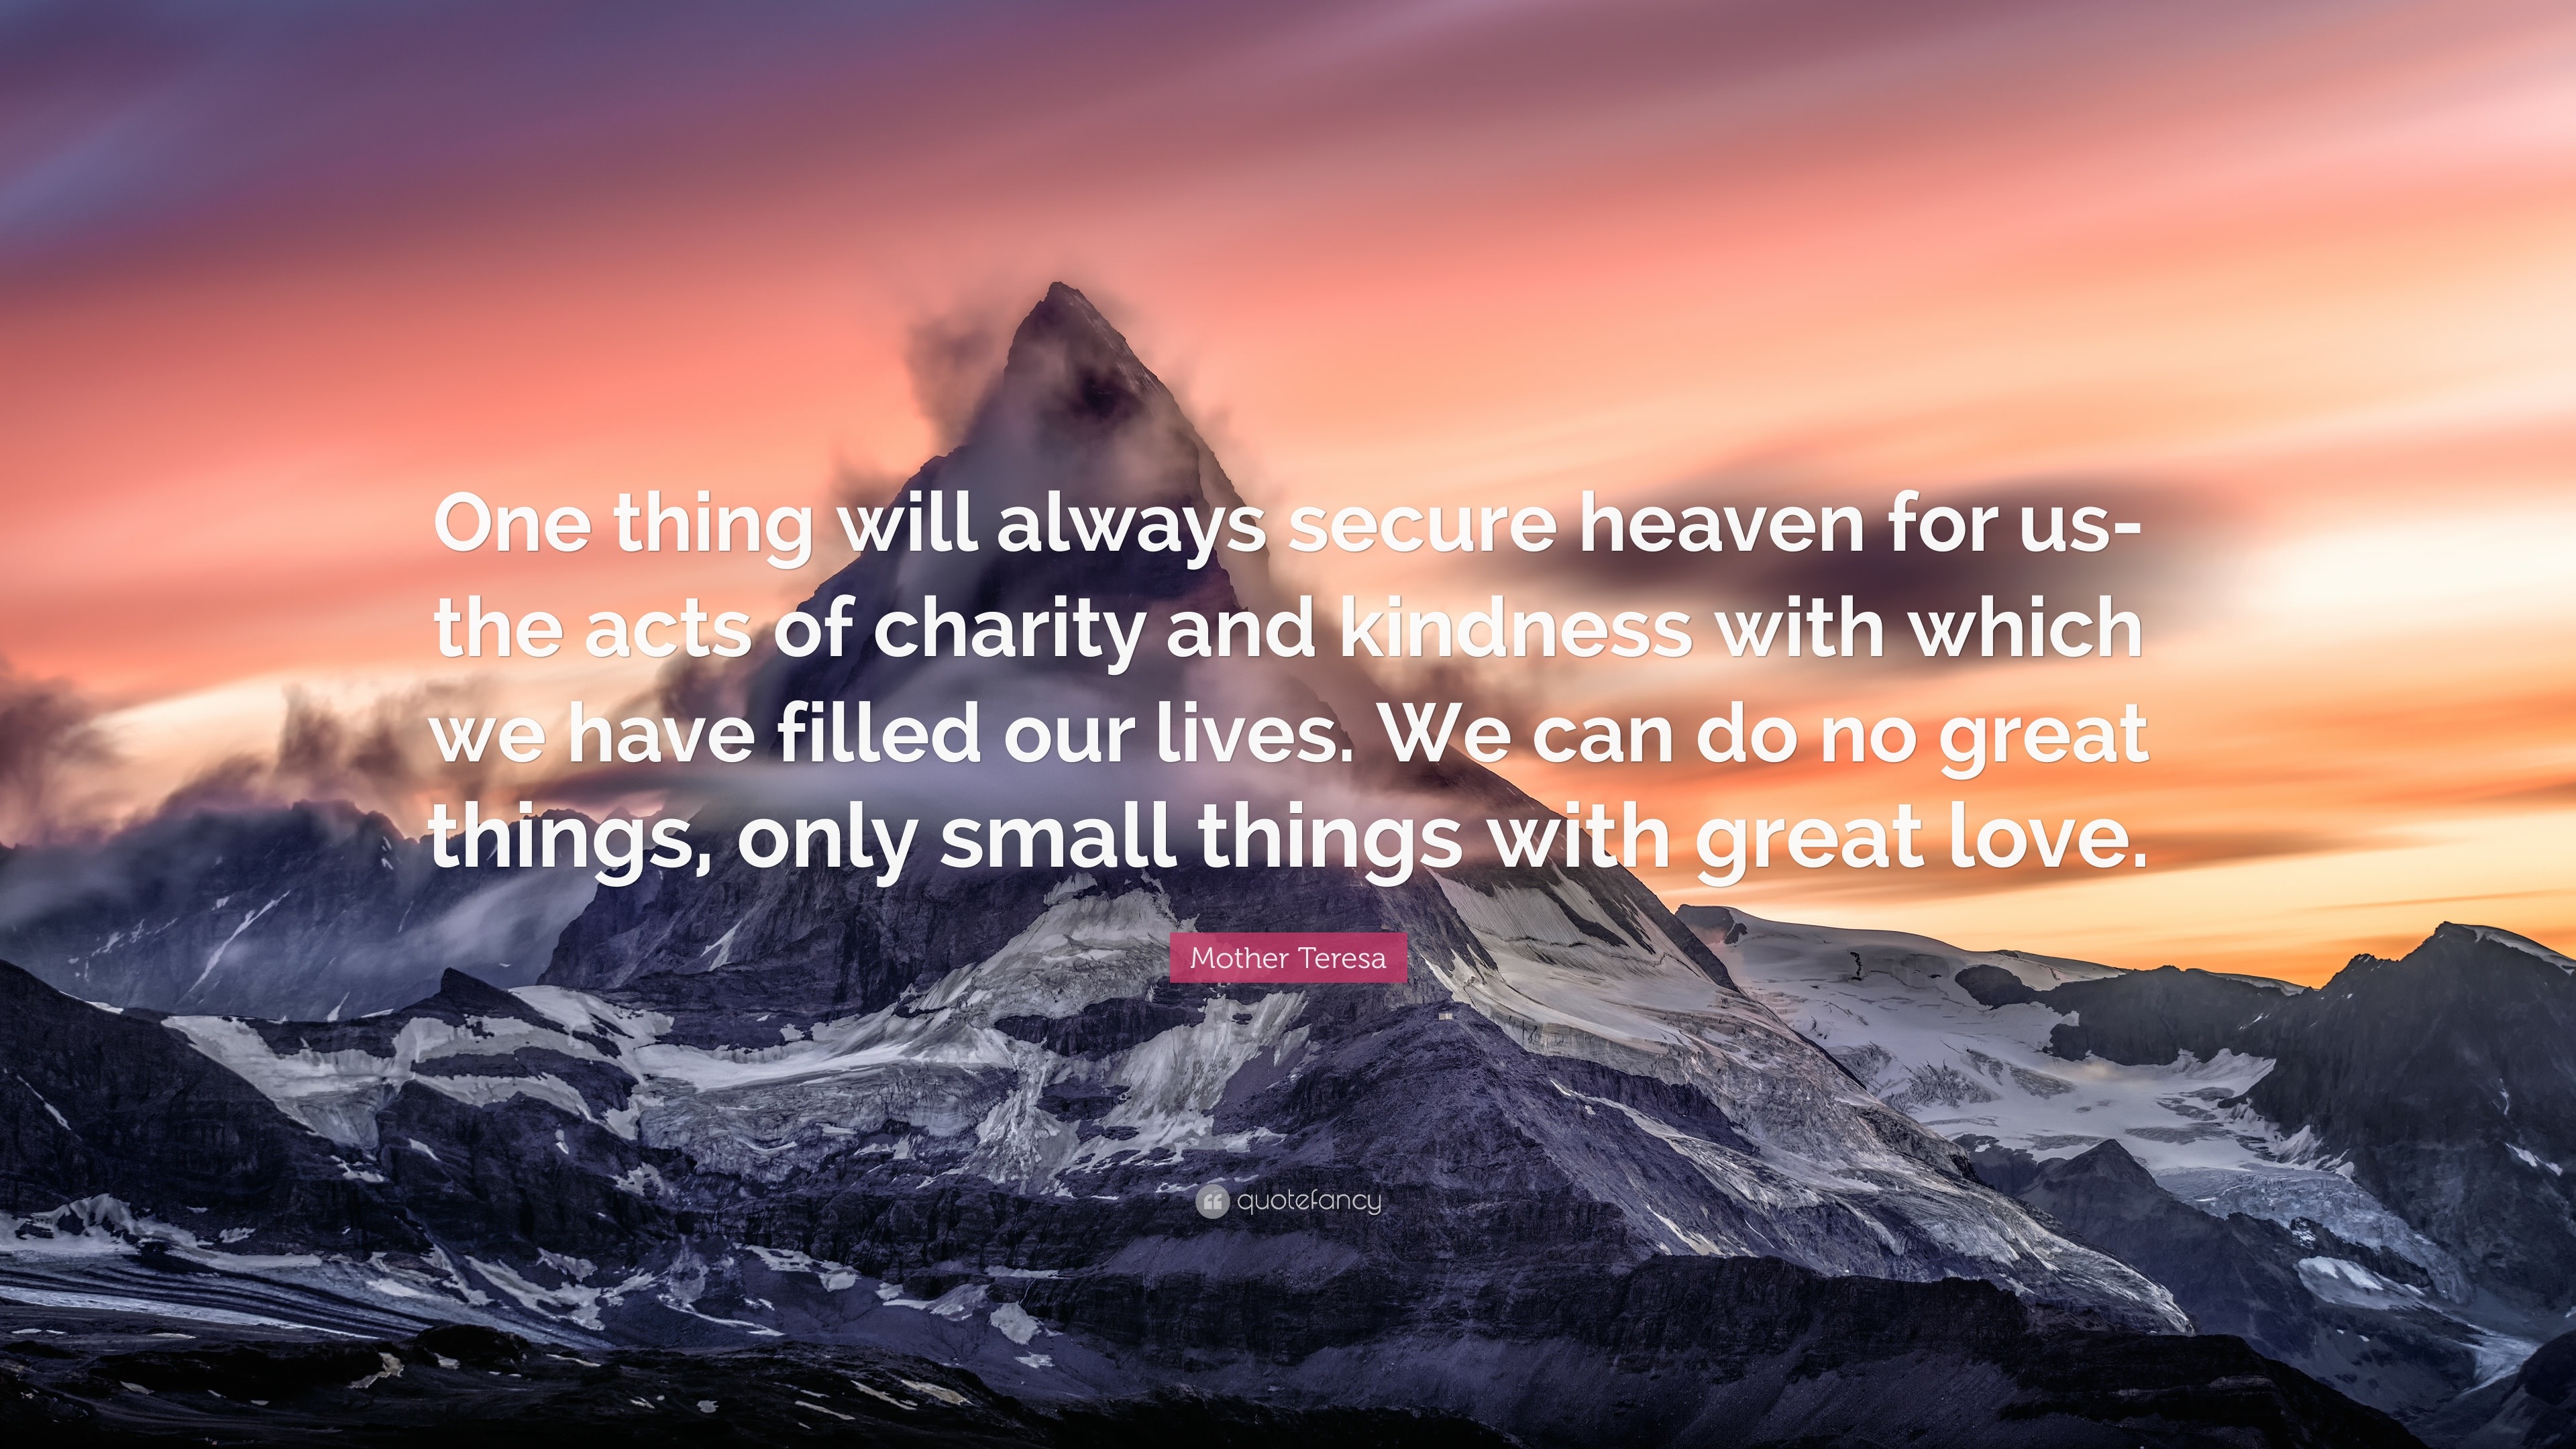 Mother Teresa Quote “ e thing will always secure heaven for us the acts